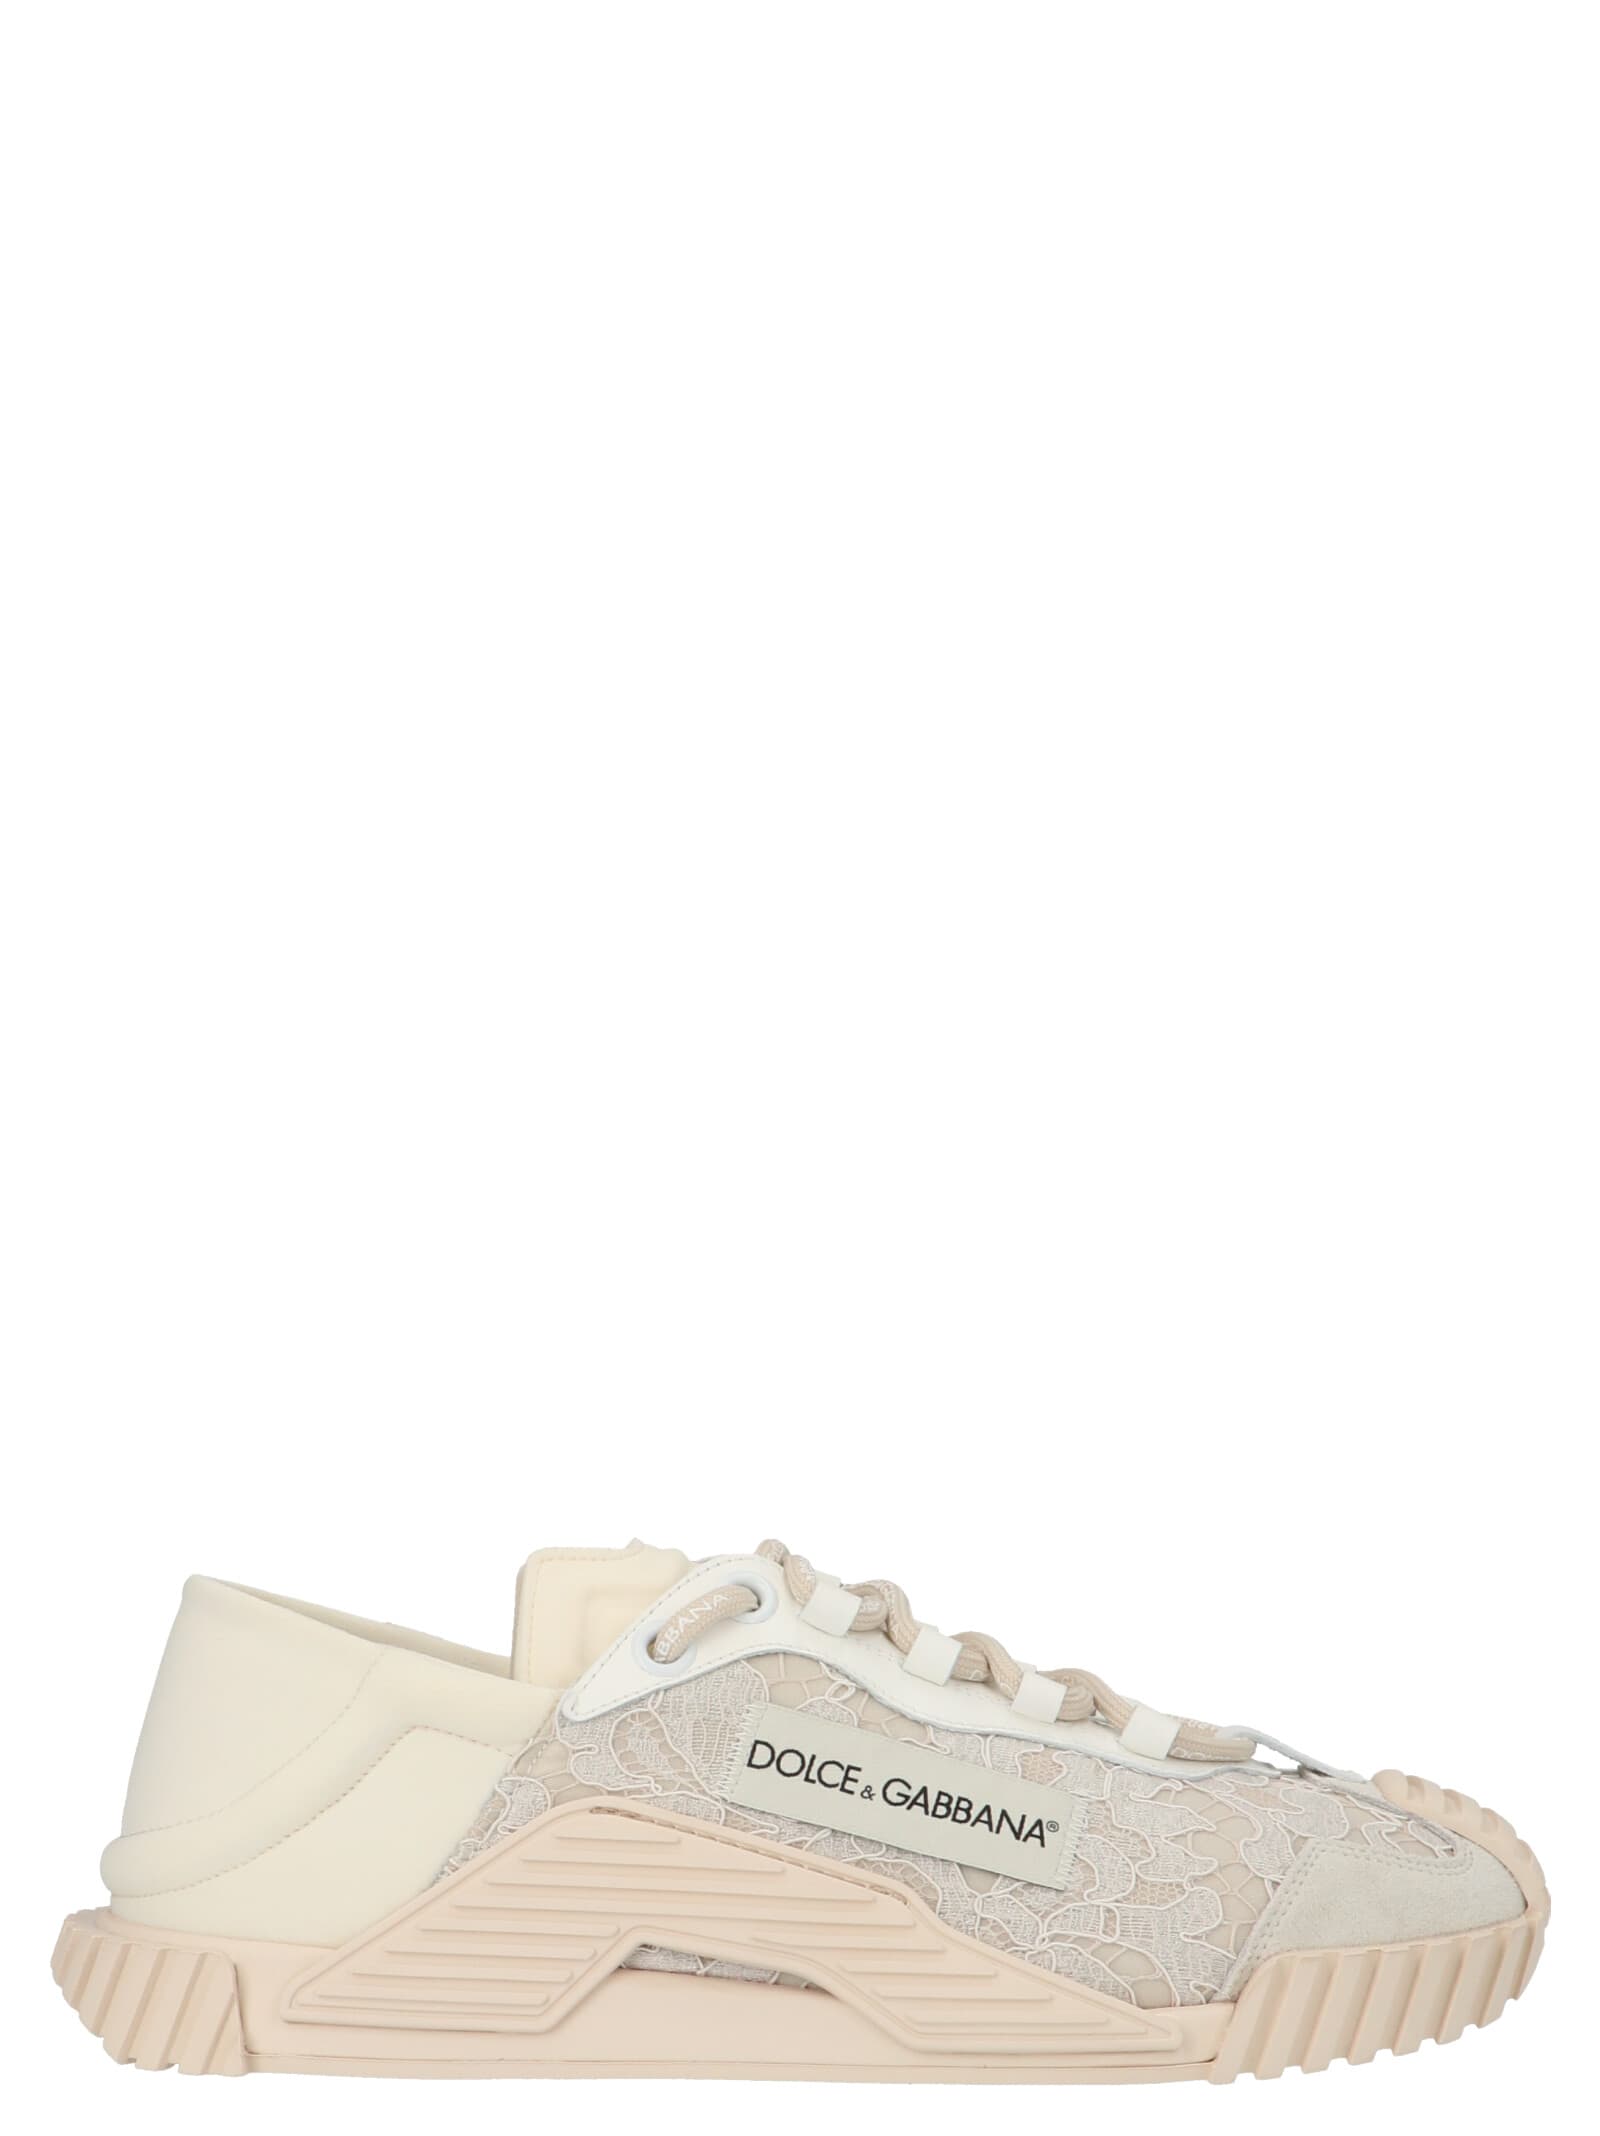 Dolce & Gabbana ns1 Sneakers